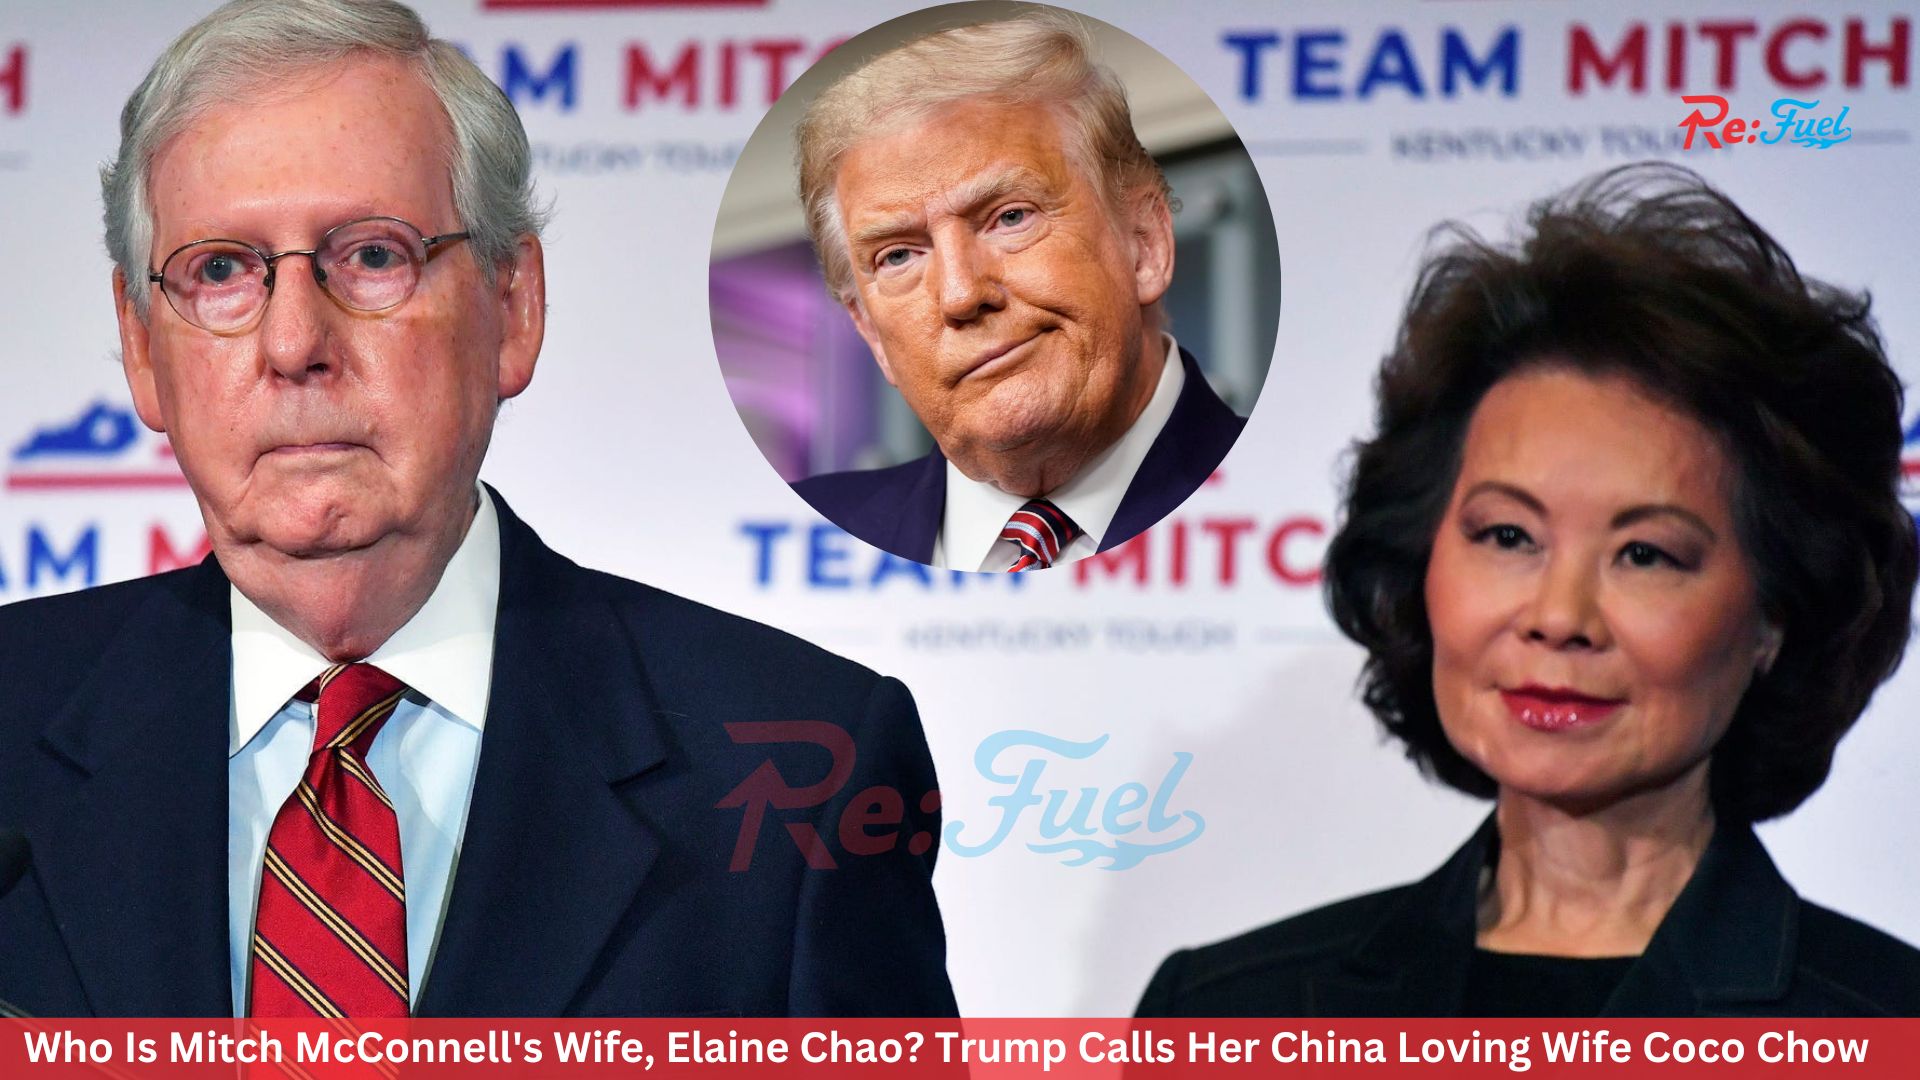 Who Is Mitch McConnell's Wife, Elaine Chao? Trump Calls Her China Loving Wife Coco Chow